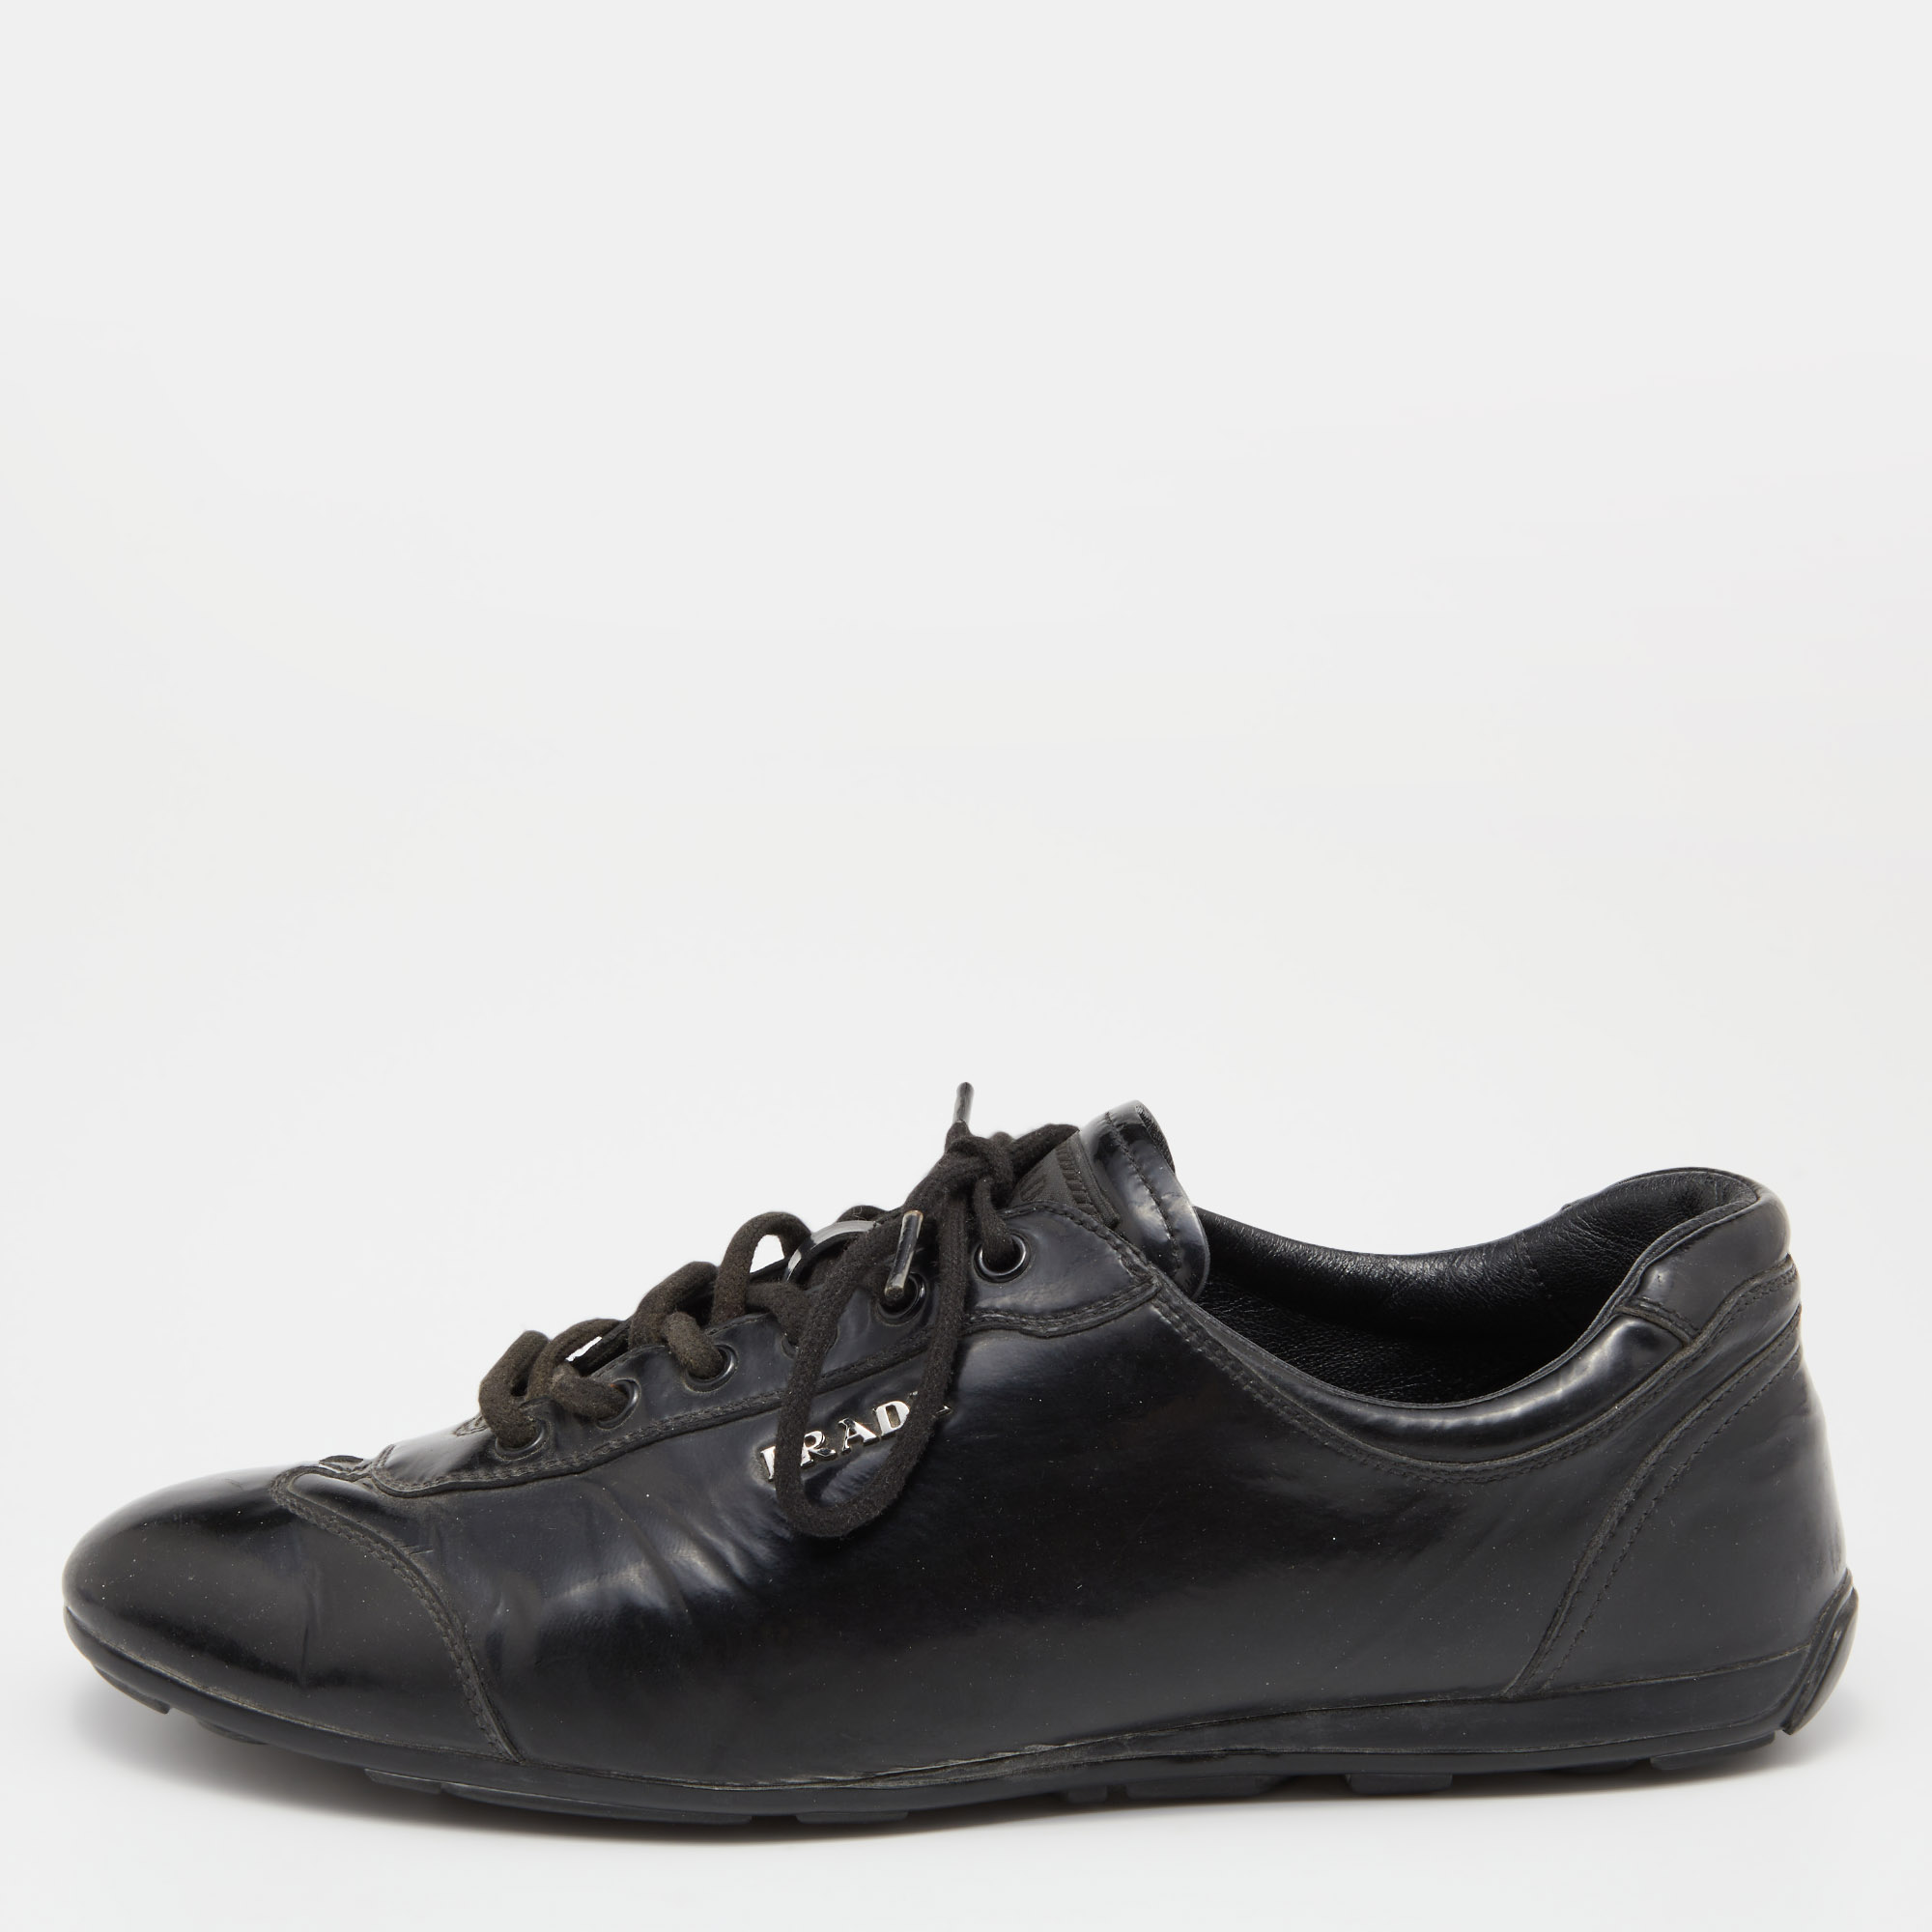 

Prada Sports Black Patent Leather Low Top Sneakers Size